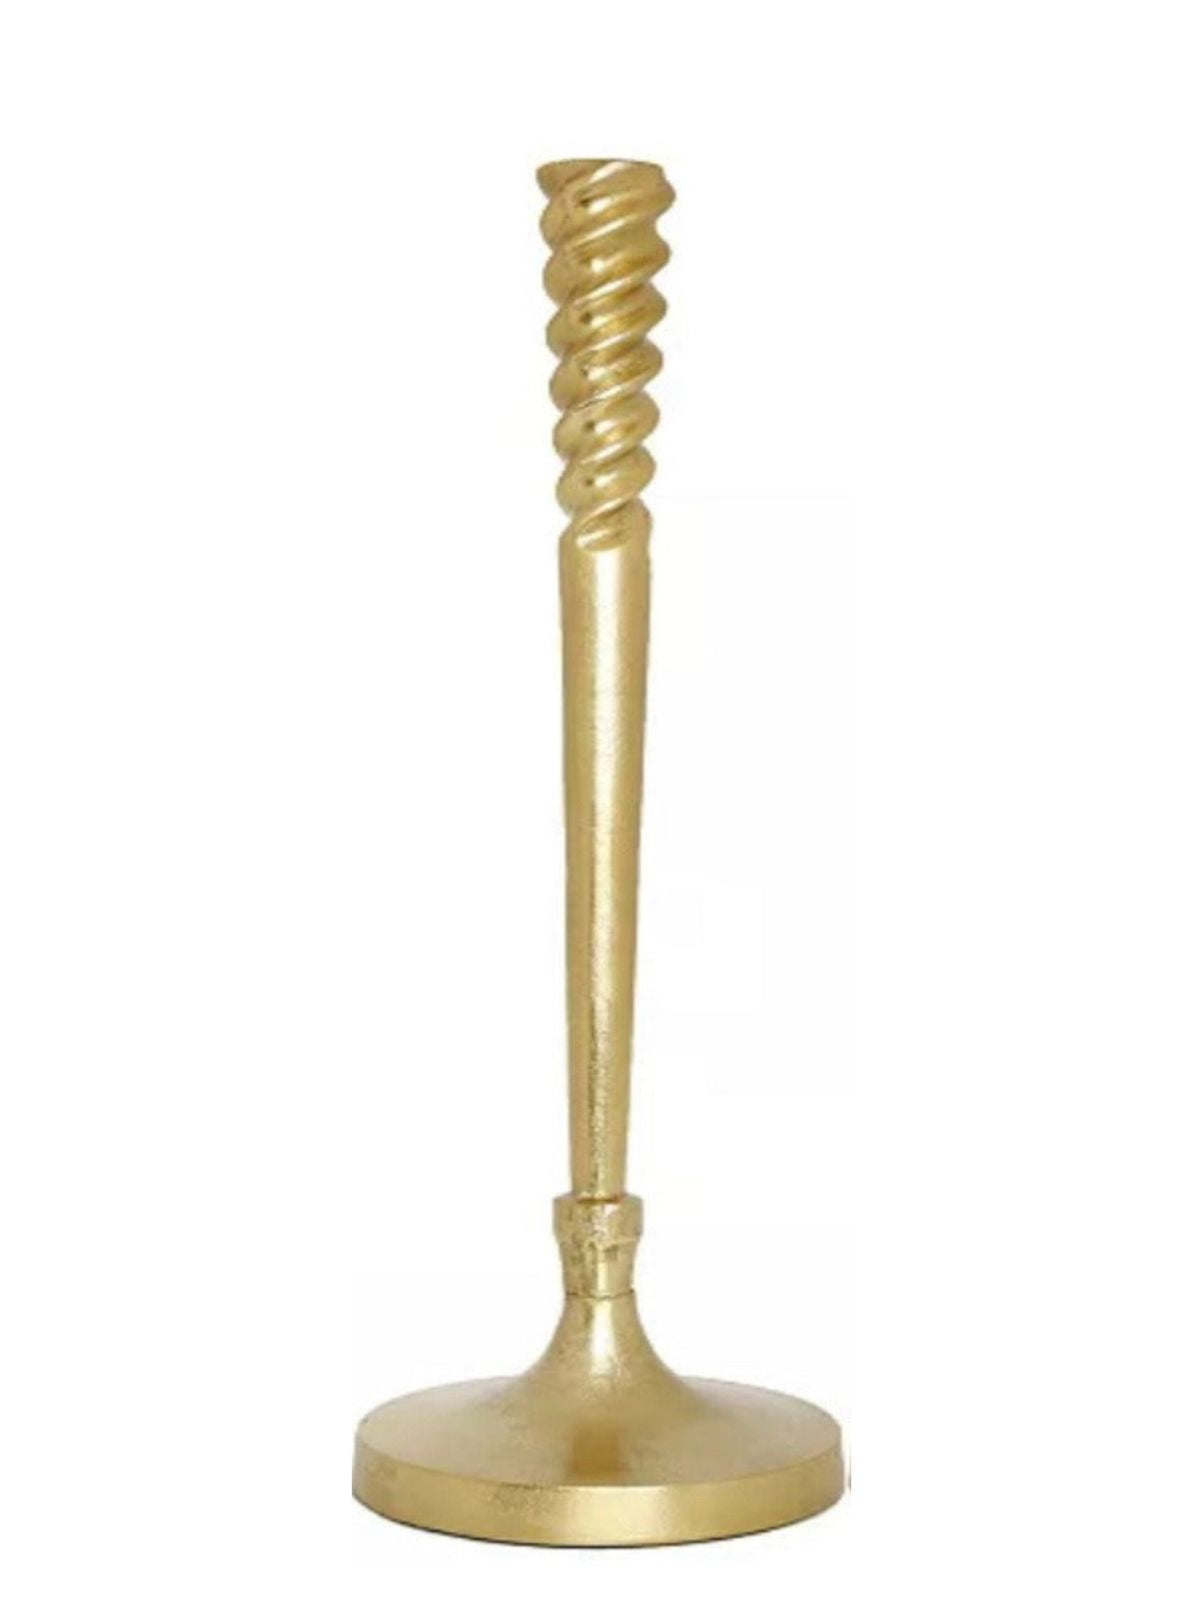 This 23H Gold Stainless Steel Candlestick Holder Has A Spiral Design On Top. Sold by KYA Home Decor.